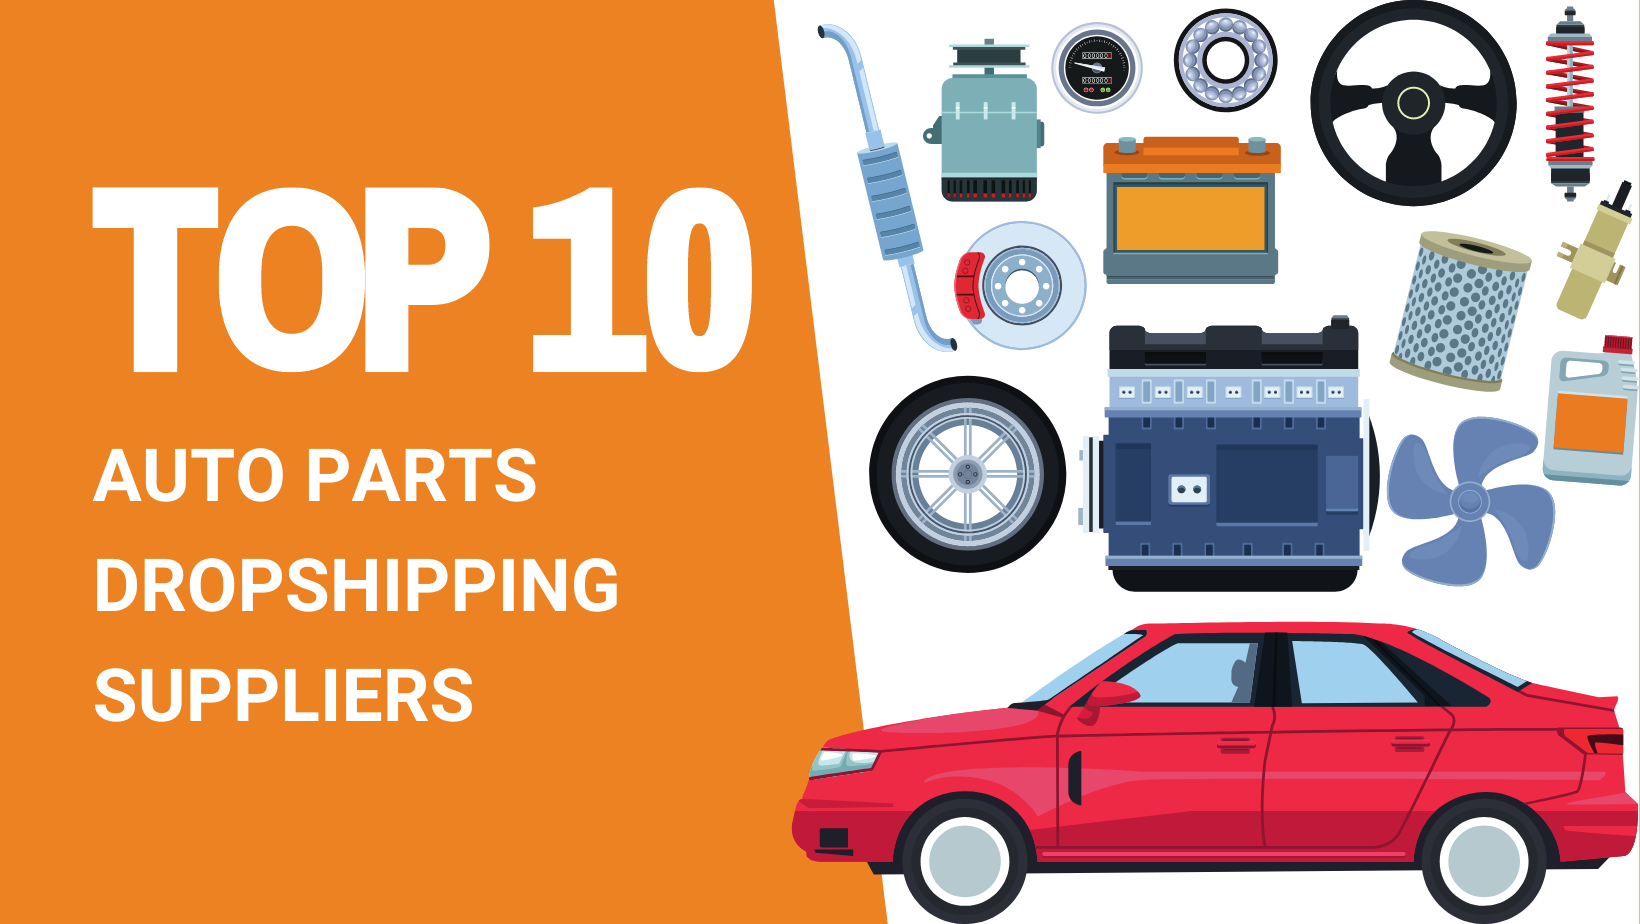 Top 10 Auto Parts Dropshipping Suppliers - Dropshipping From China